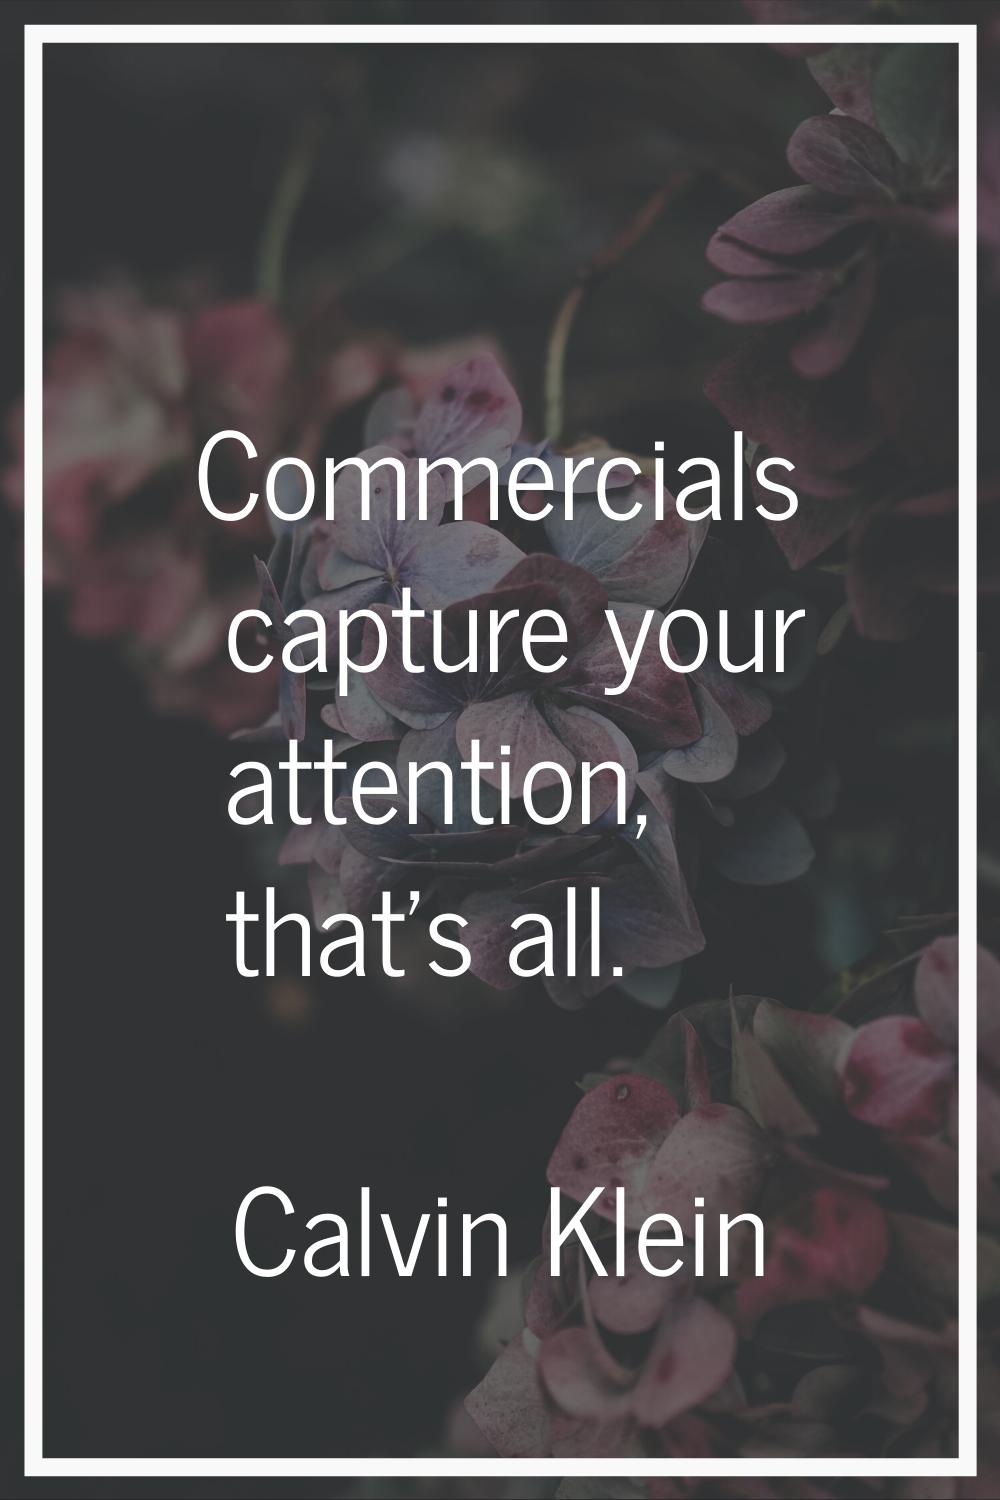 Commercials capture your attention, that's all.